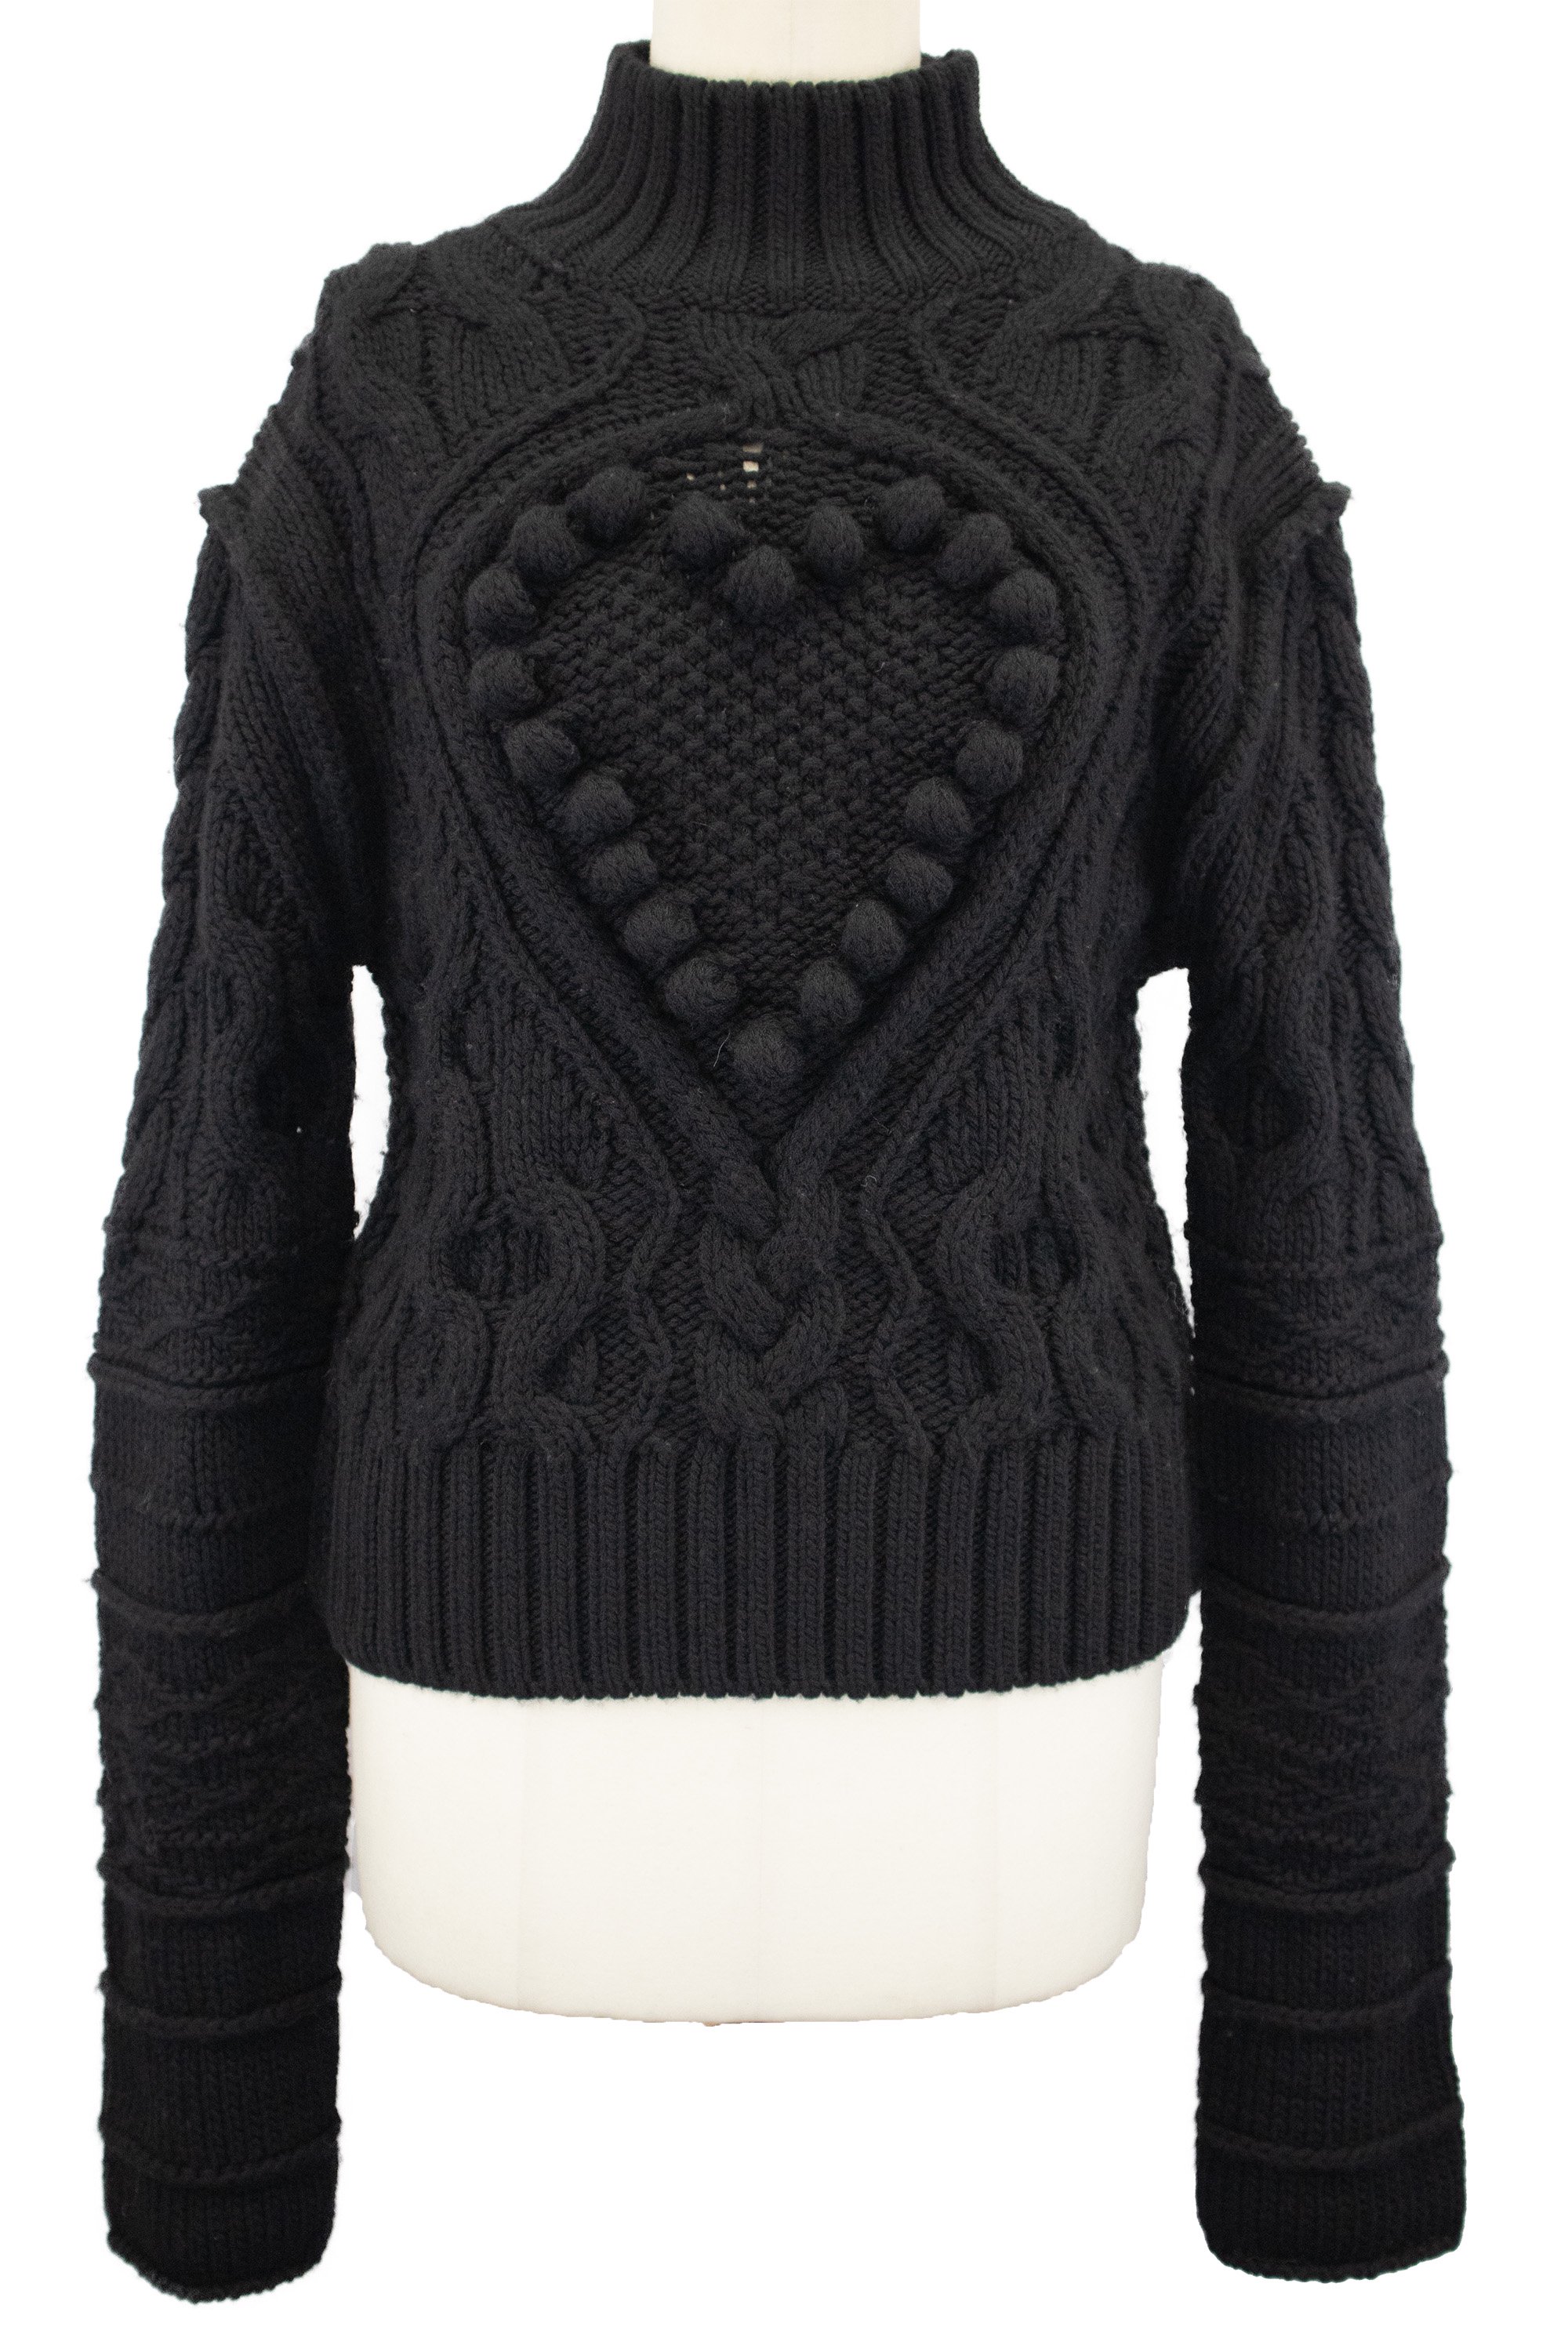 <img class='new_mark_img1' src='https://img.shop-pro.jp/img/new/icons8.gif' style='border:none;display:inline;margin:0px;padding:0px;width:auto;' />SPORT MAX Turtle neck knit